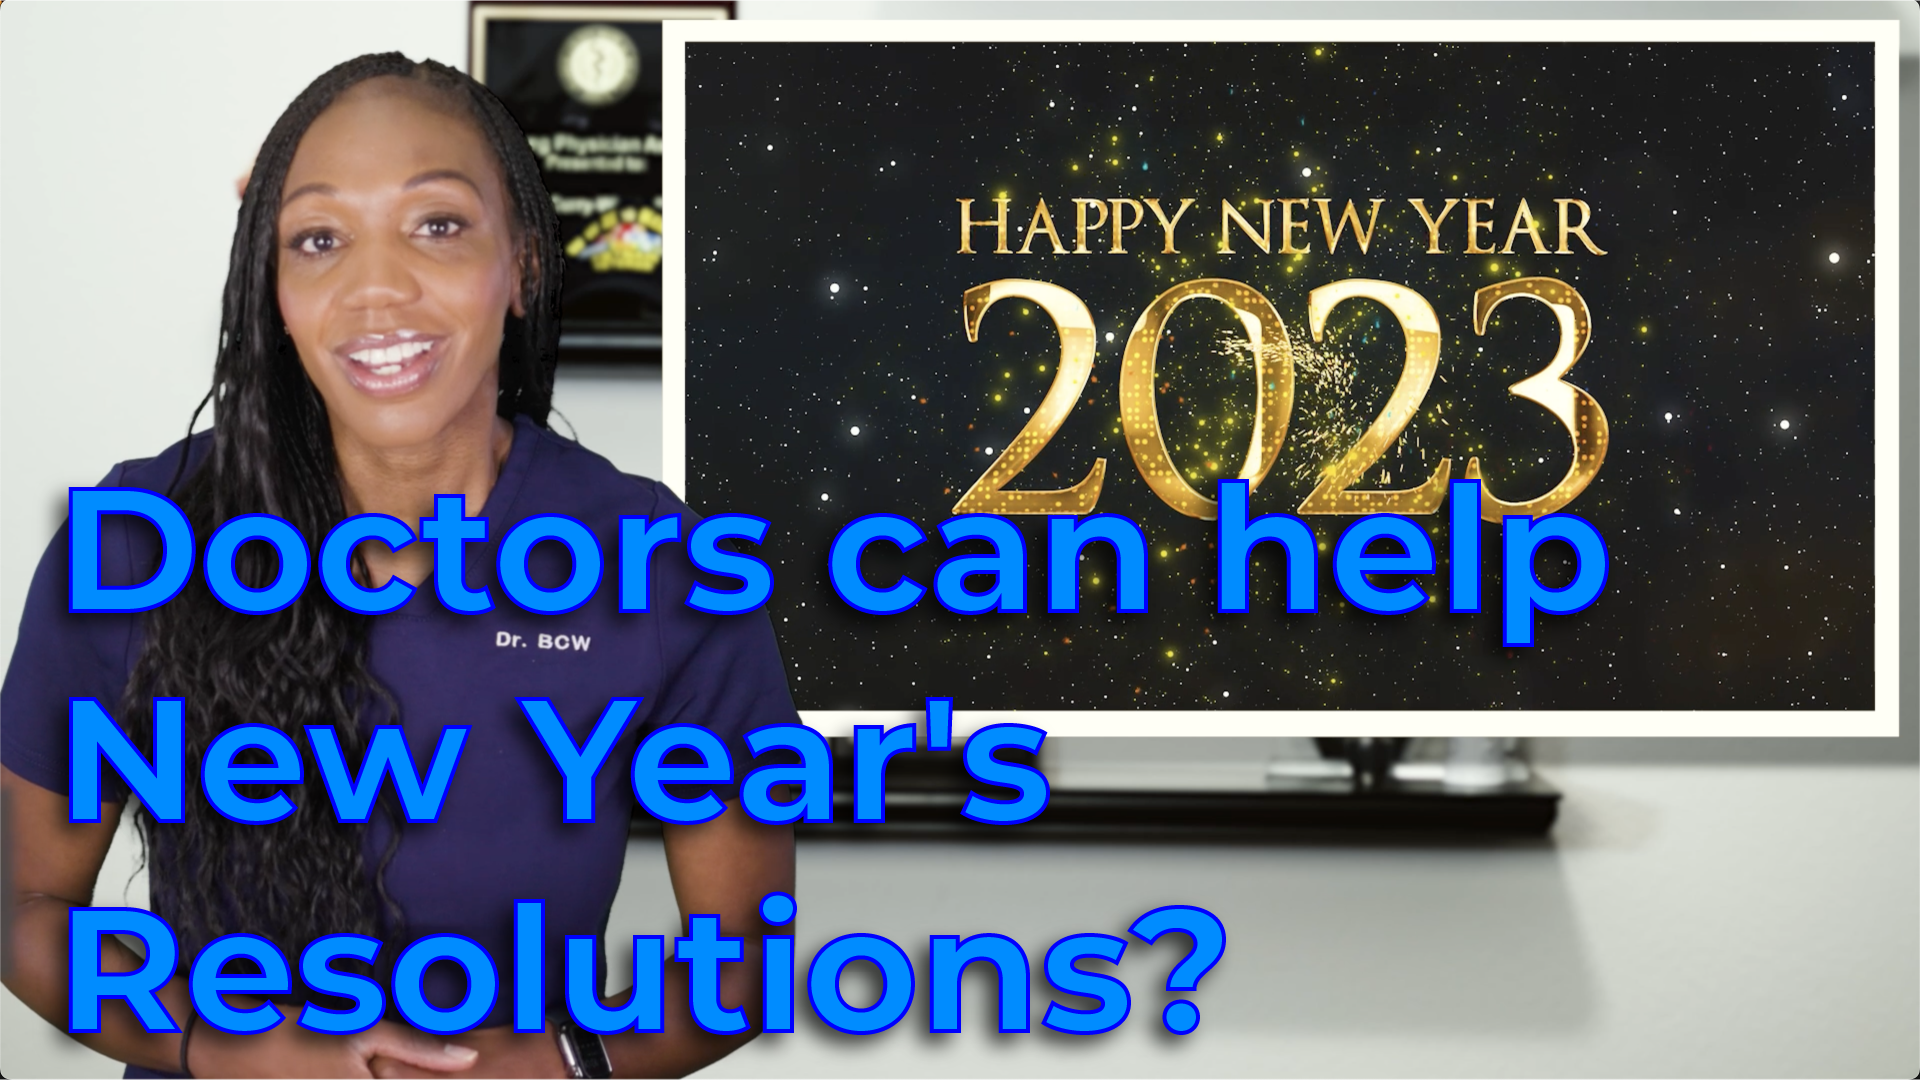 How can a doctor help with New Year’s Resolutions?